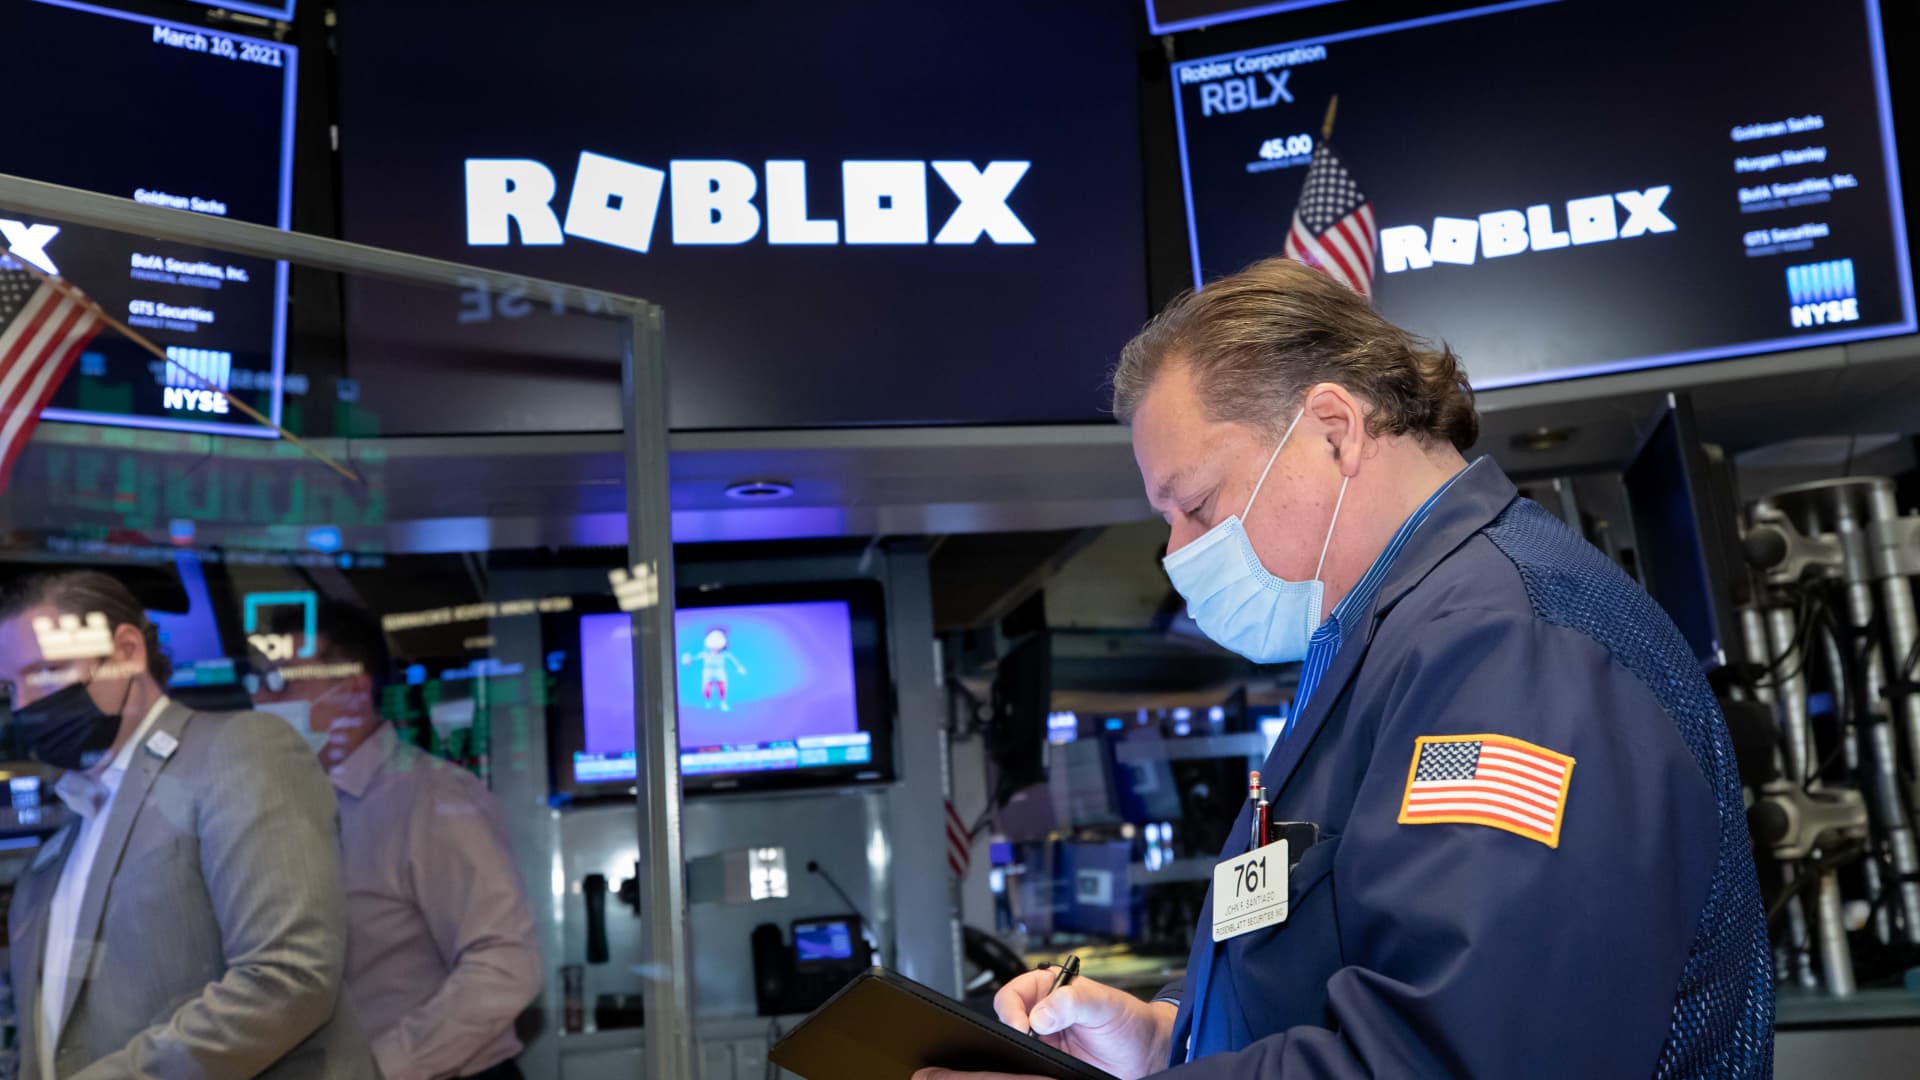 Roblox stock zooms 25%, heads toward best day in 15 months after earnings -  MarketWatch